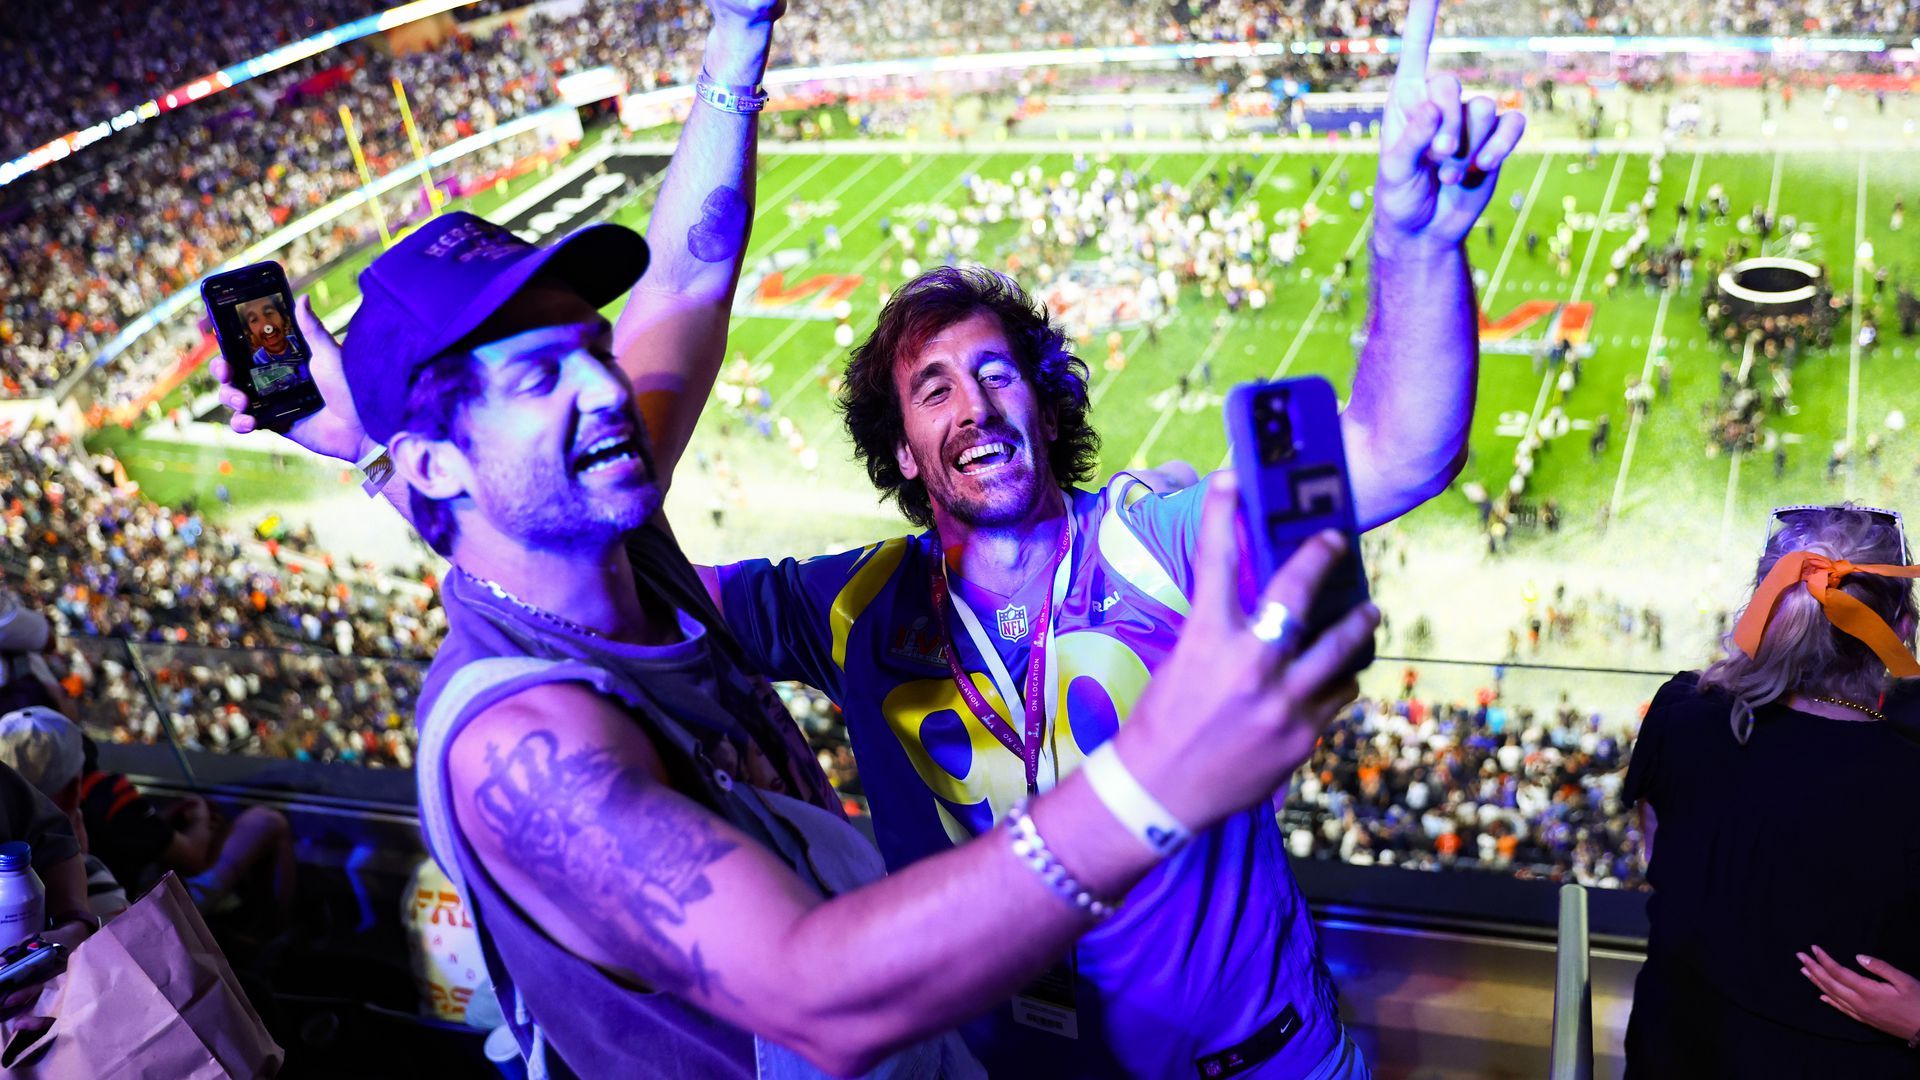 Two Rams fans celebrate in the stands after their team's Super Bowl vistory.